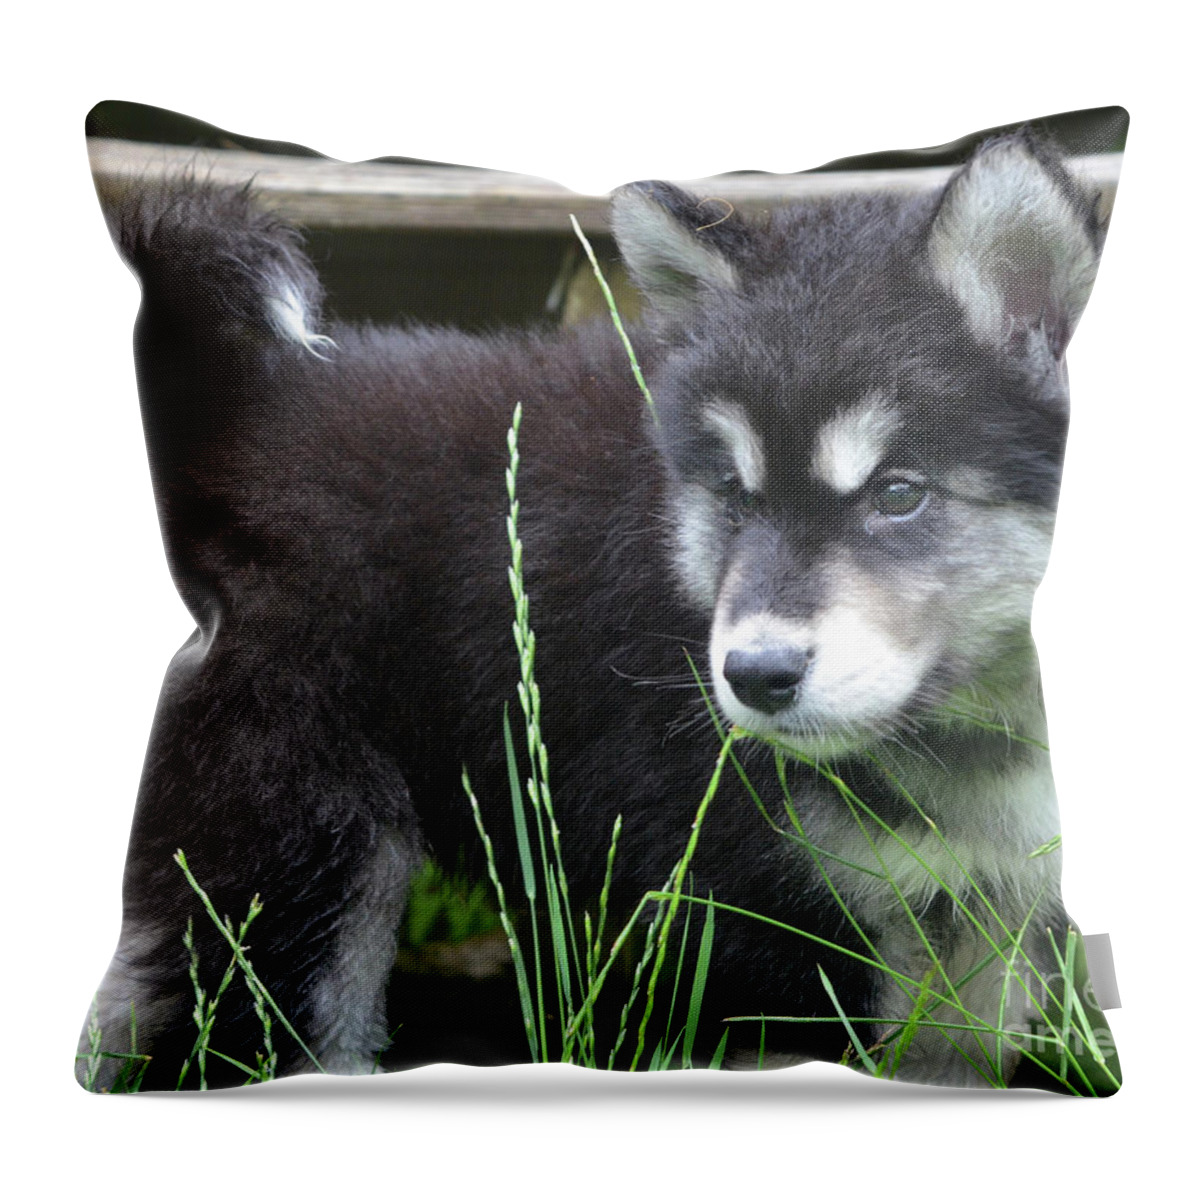 Alusky Throw Pillow featuring the photograph Fluffy and Furry Alusky Puppy Dog Looking through Tall Grass by DejaVu Designs